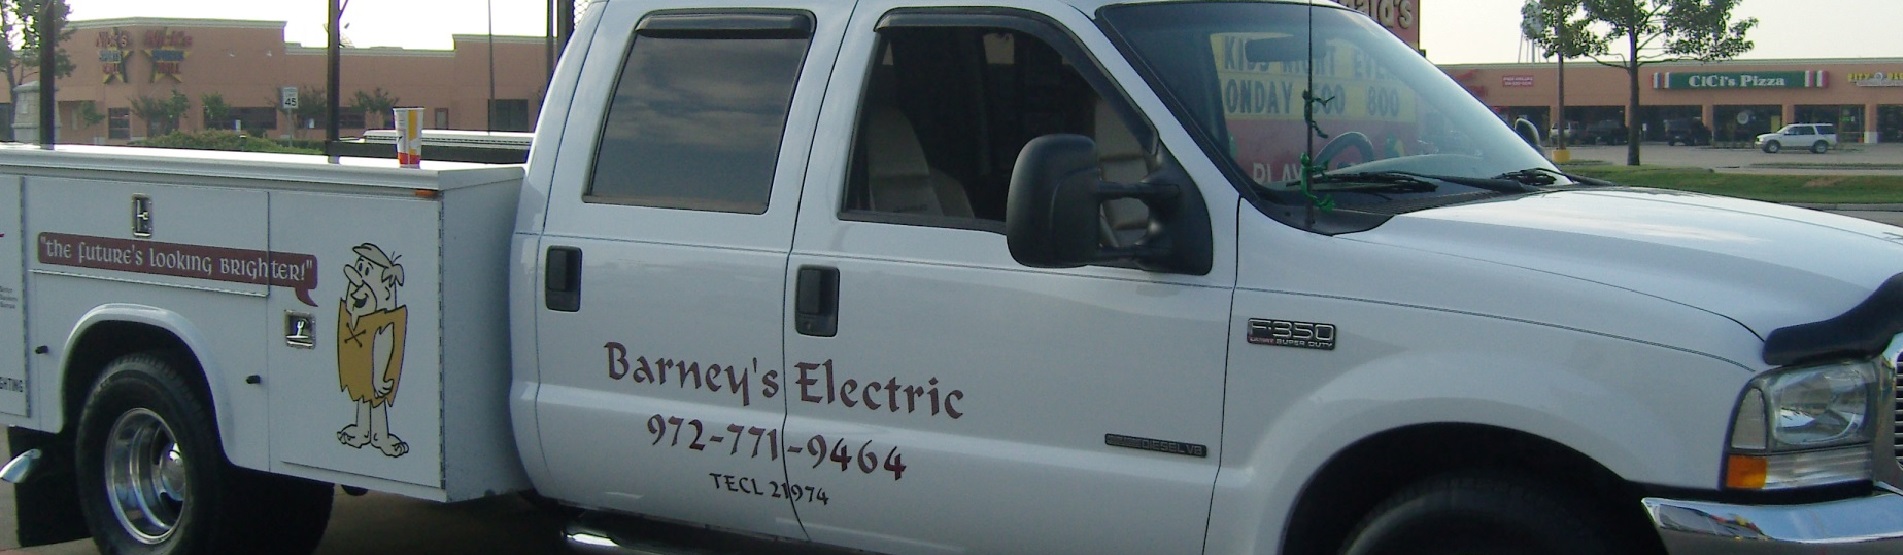 remodel electrician Rockwall texas, remodeling electrician Rockwall texas, electrical remodel Rockwall texas, electrical remodeling Rockwall texas, electrical remodeling contractor Rockwall texas Electrician Rockwall TX Barney's Electric Full Service Electrician Residential Commercial Retail and New Construction Wiring Repair Installation Service 24 Hour Emergency Services Master Electrician Rockwall Texas